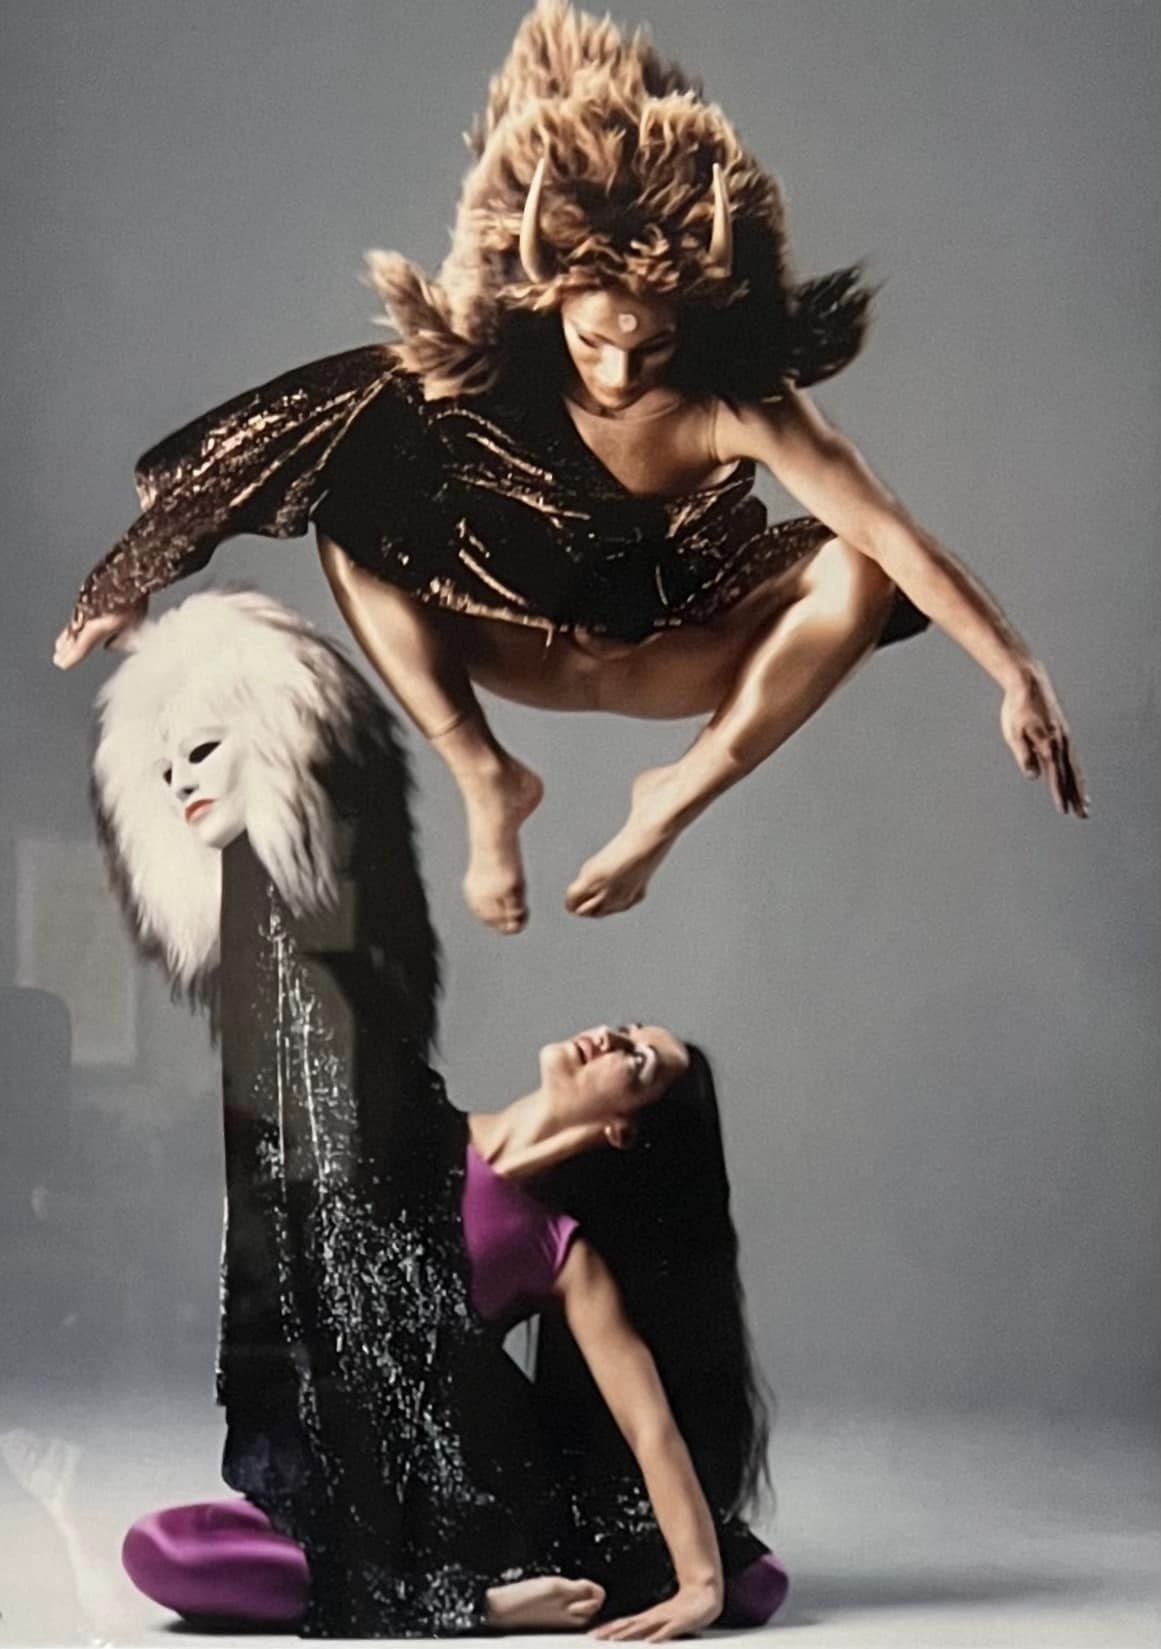 Two dancers. Mark in a fur mask in a squat position jumping in the air above Diane, sitting on the ground holding up a mask with fur